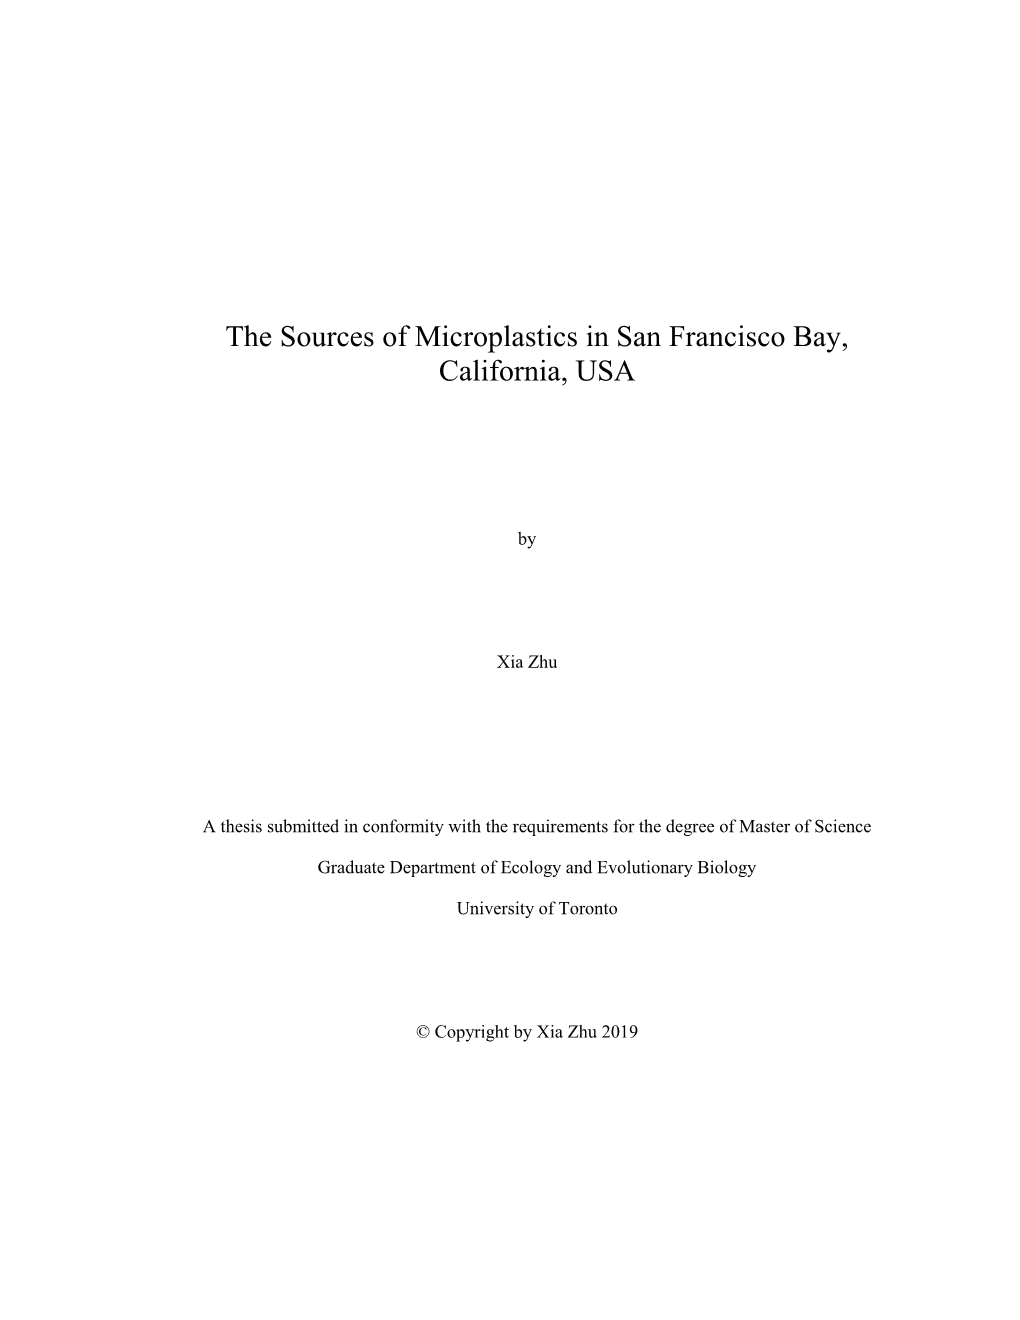 The Sources of Microplastics in San Francisco Bay, California, USA